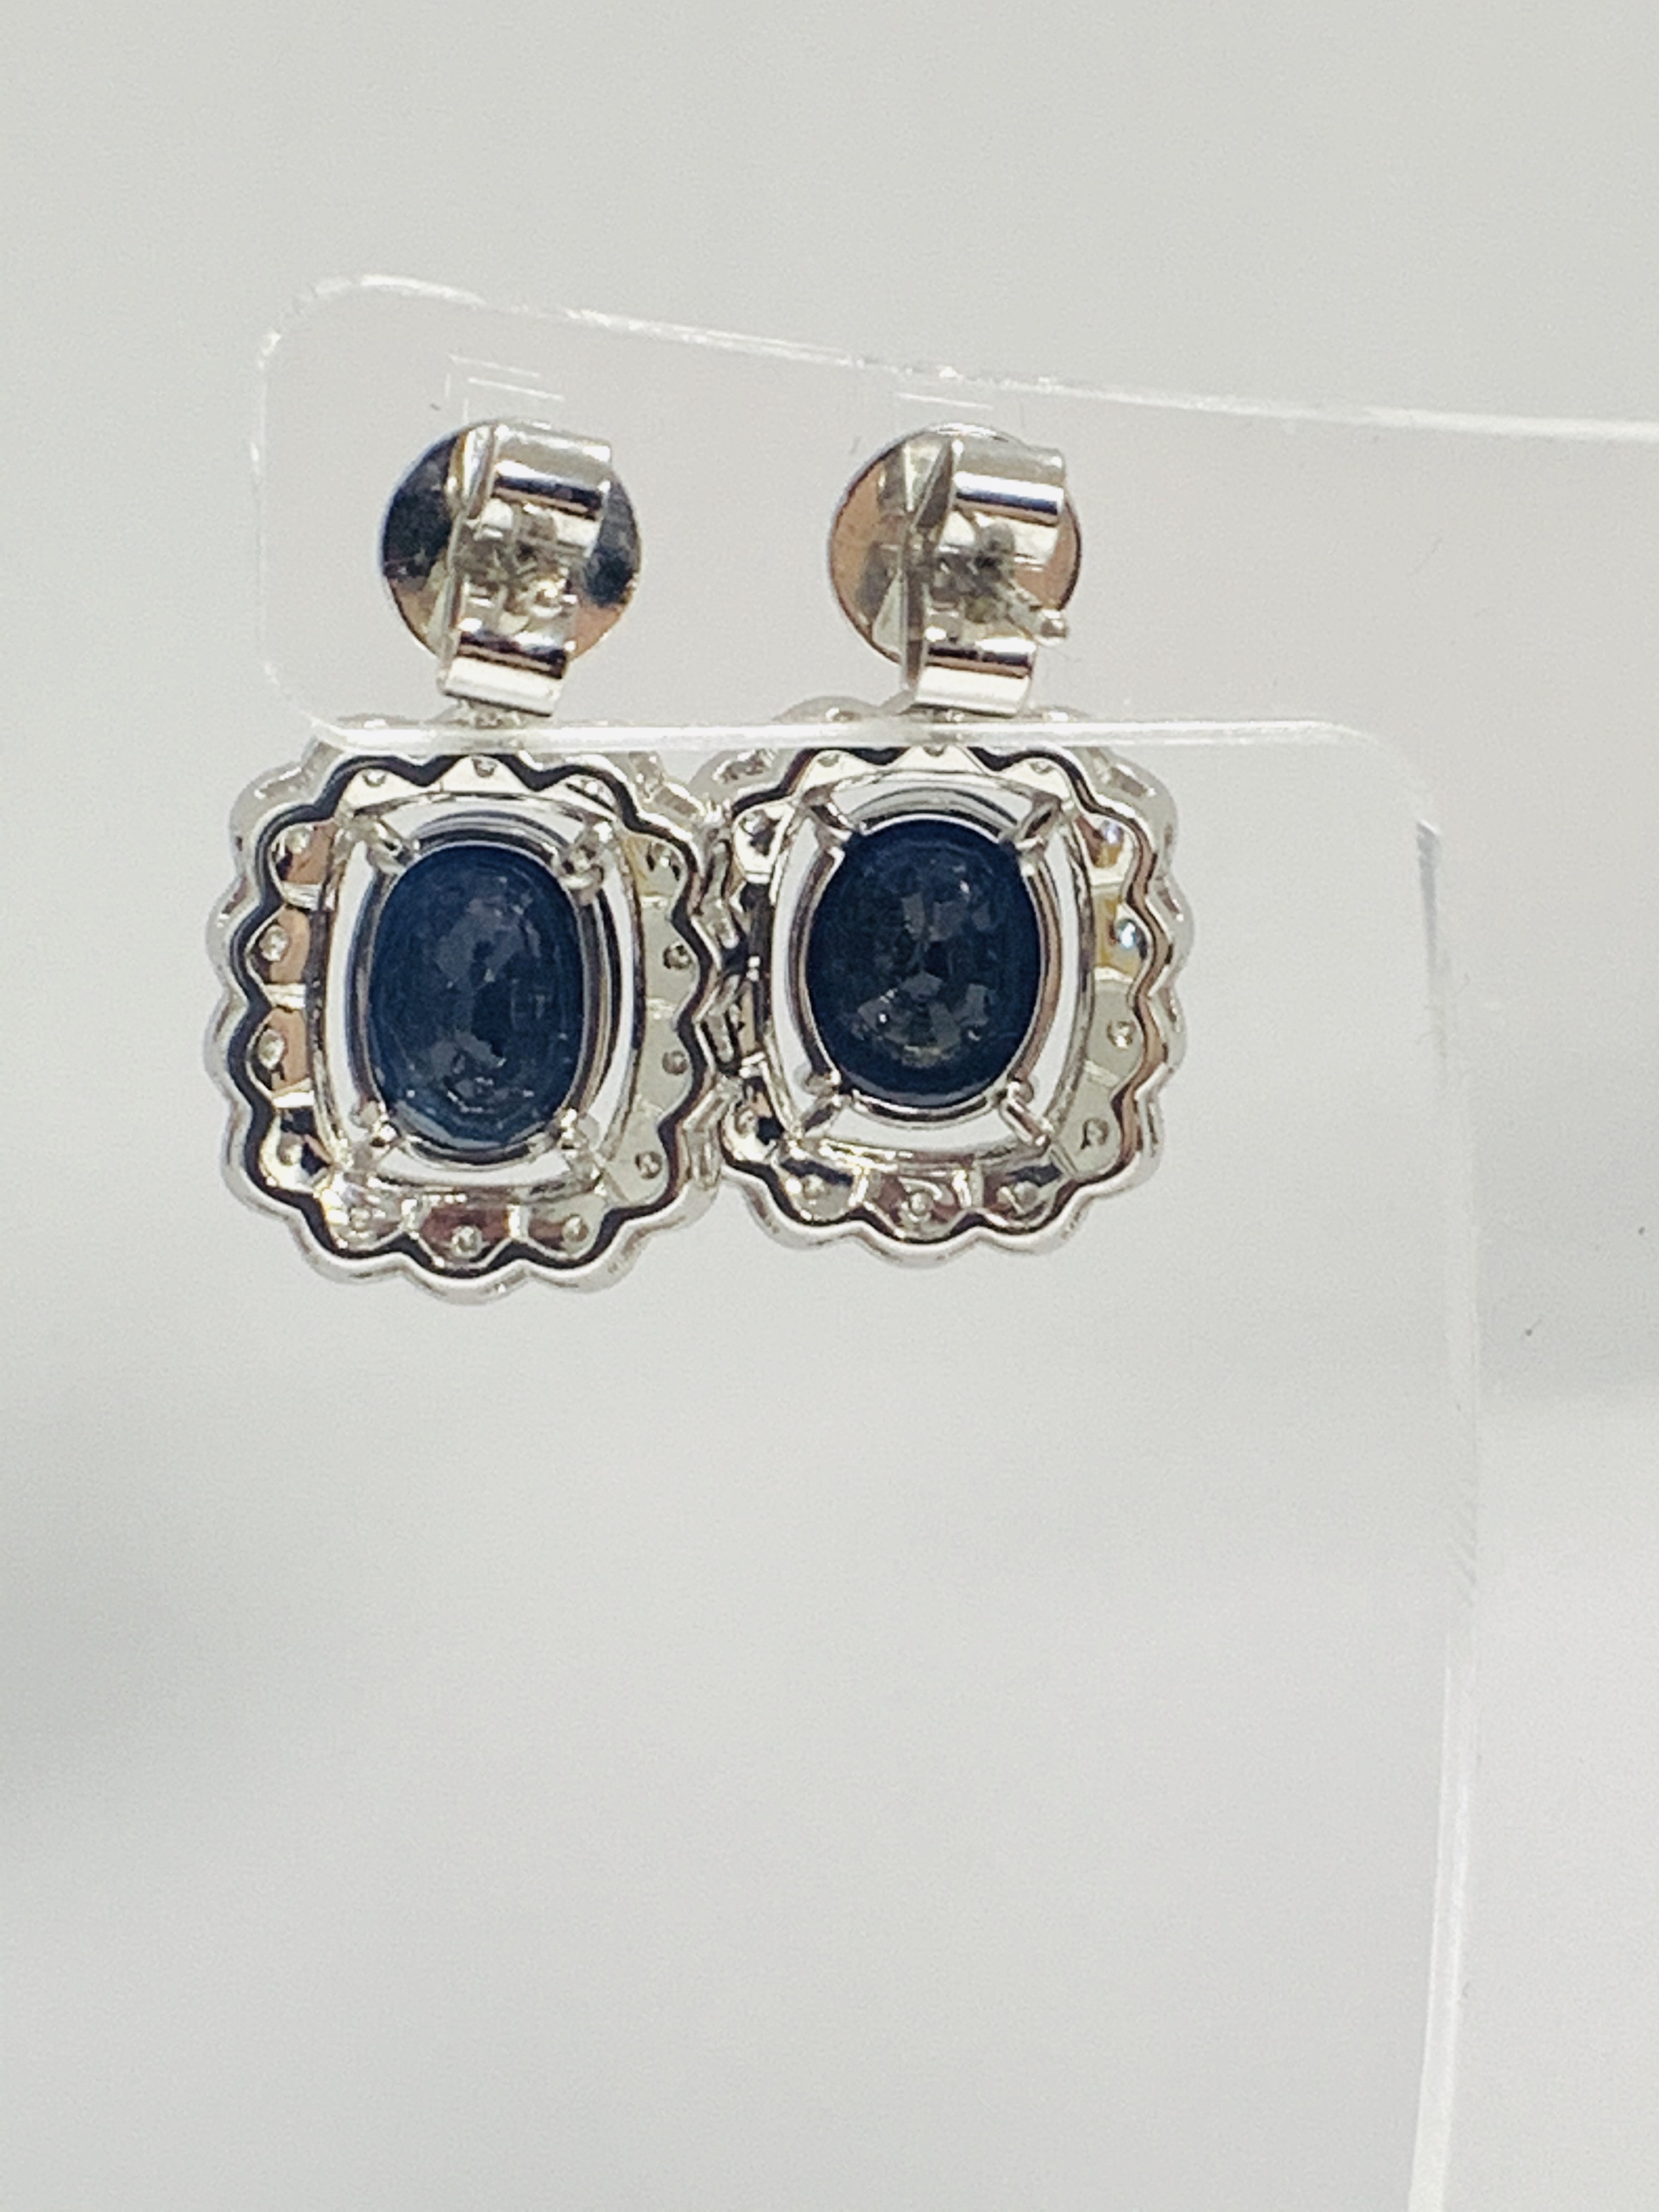 18ct White Gold Sapphire and Diamond earrings featiring, 2 oval cut, dark blue Kashmir Sapphires (4. - Image 10 of 12